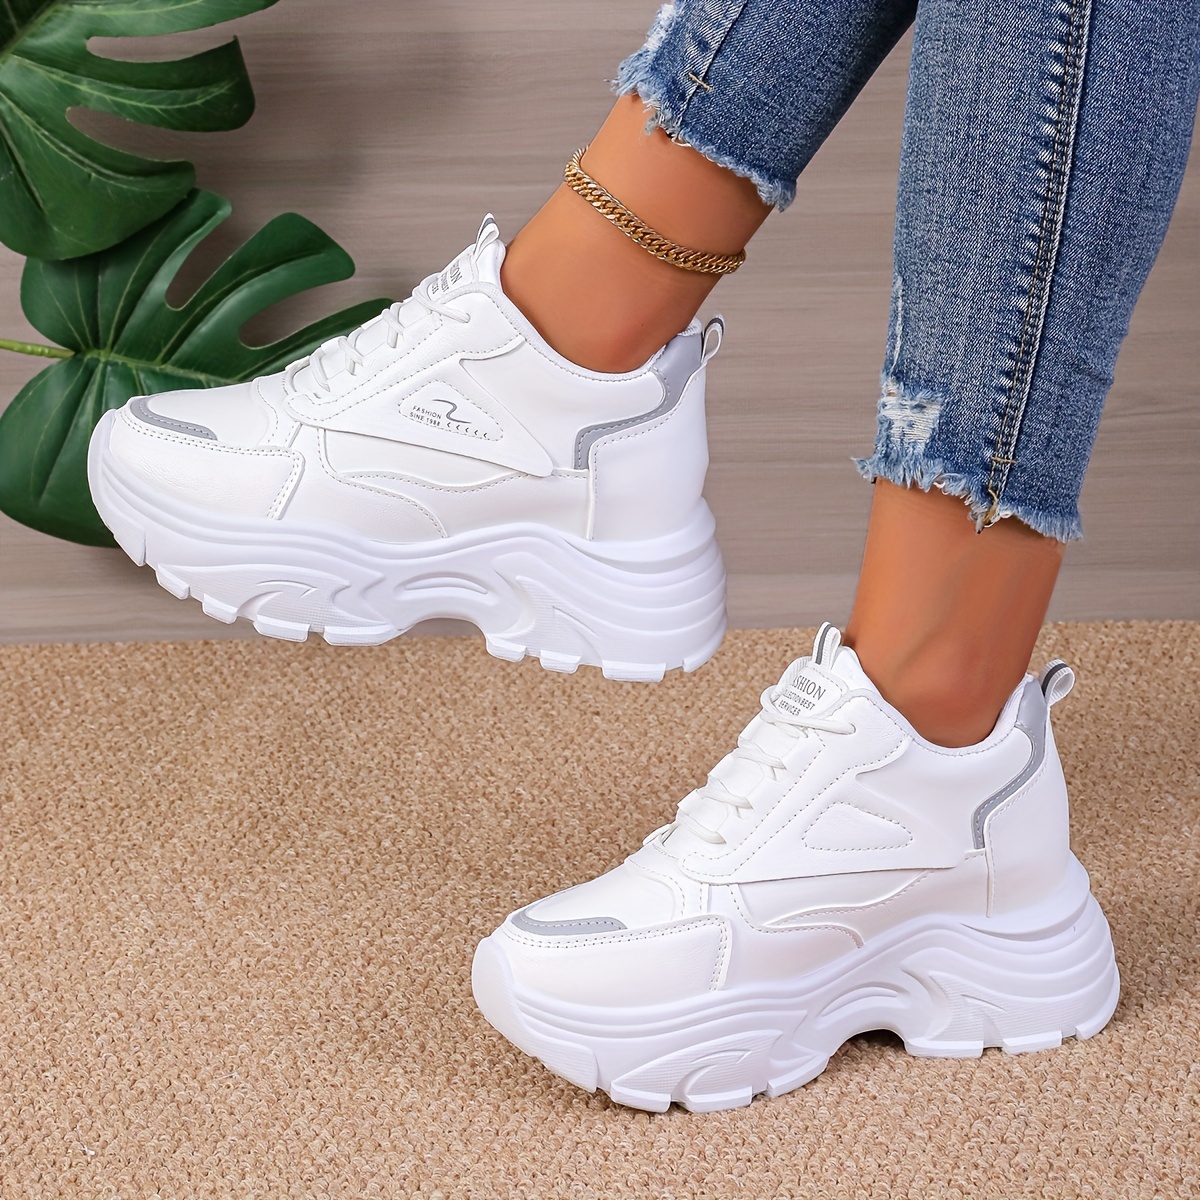 

Women's Fashion Chunky Sneakers, Casual Lace Up Heightening Low Top Trainers, Trendy Wedge Sports Shoes